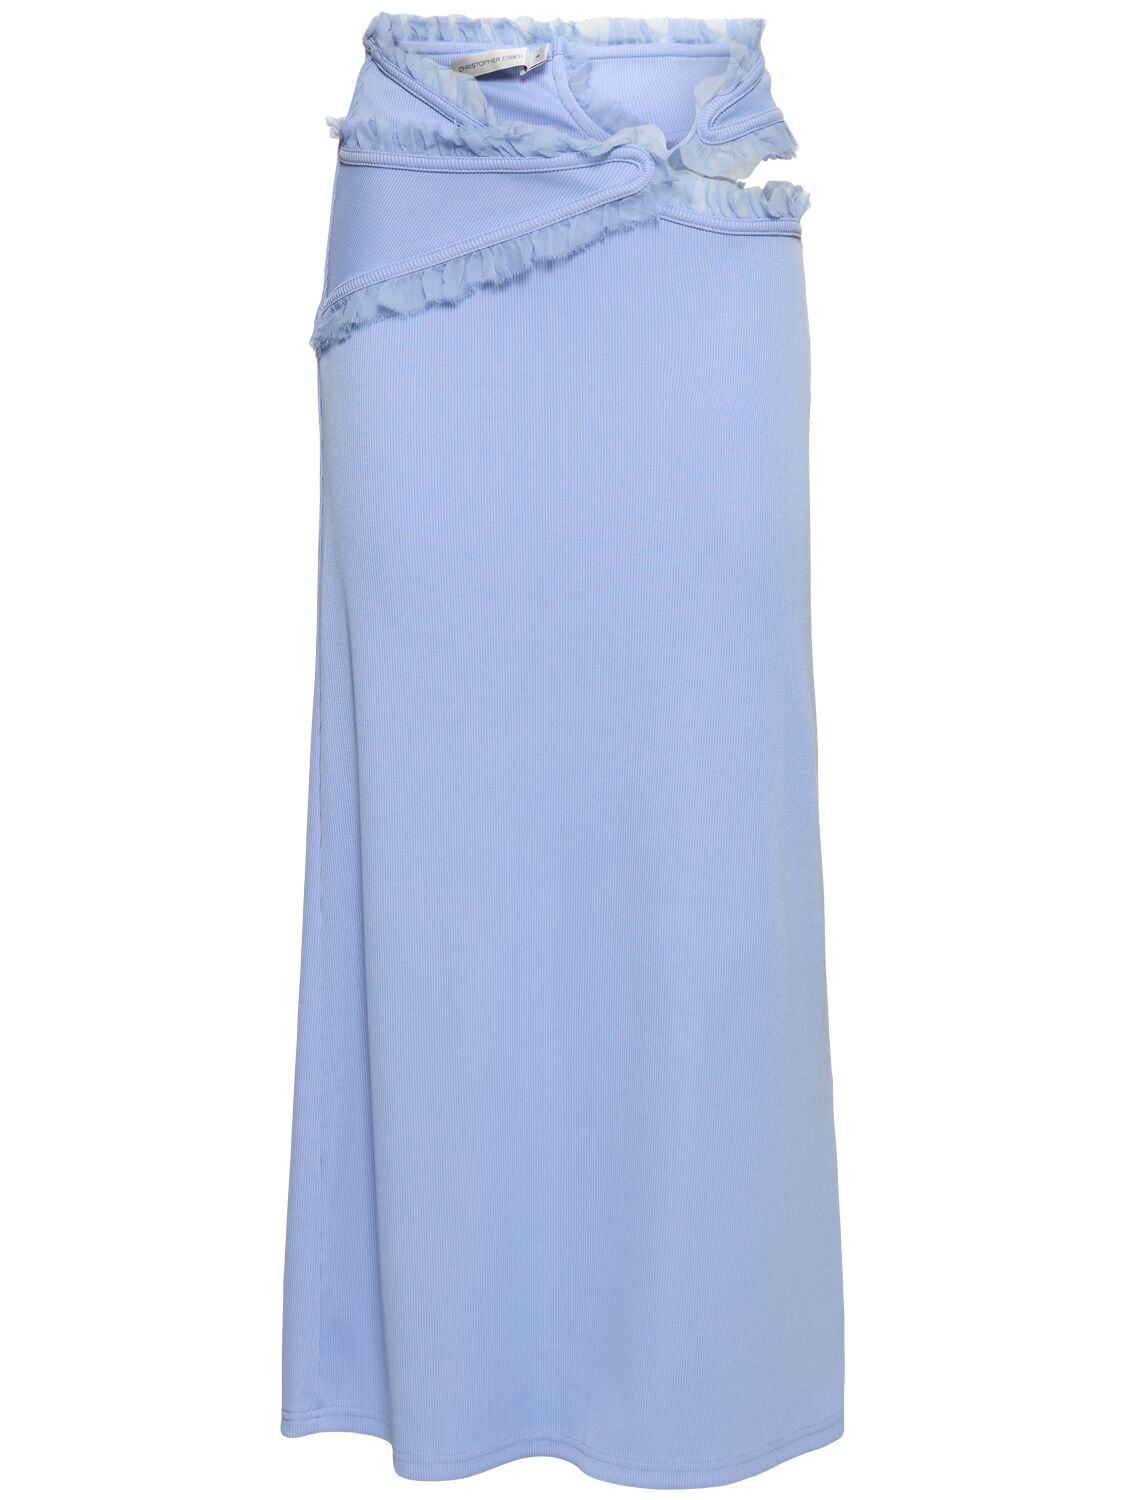 Carina Cutout Long Skirt W/tulle Details